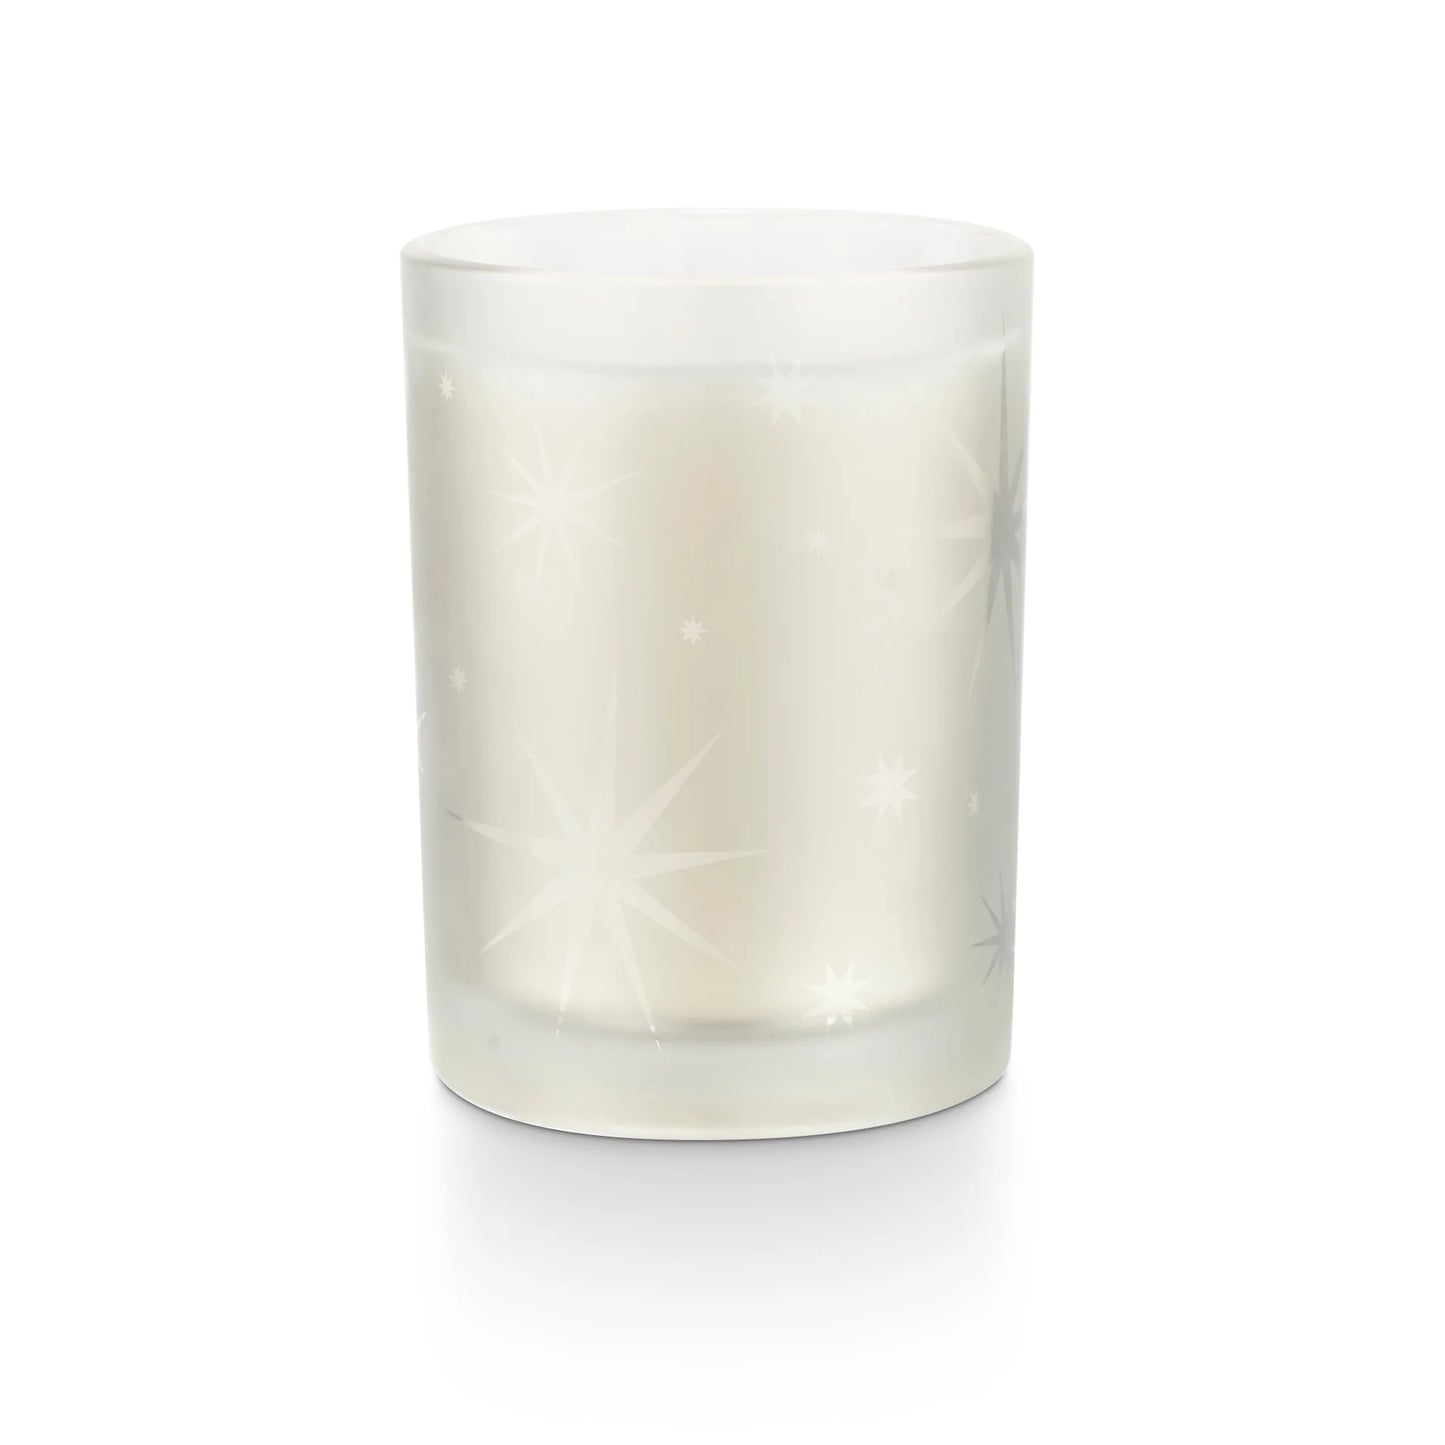 ILLUME GIFTED GLASS CANDLE